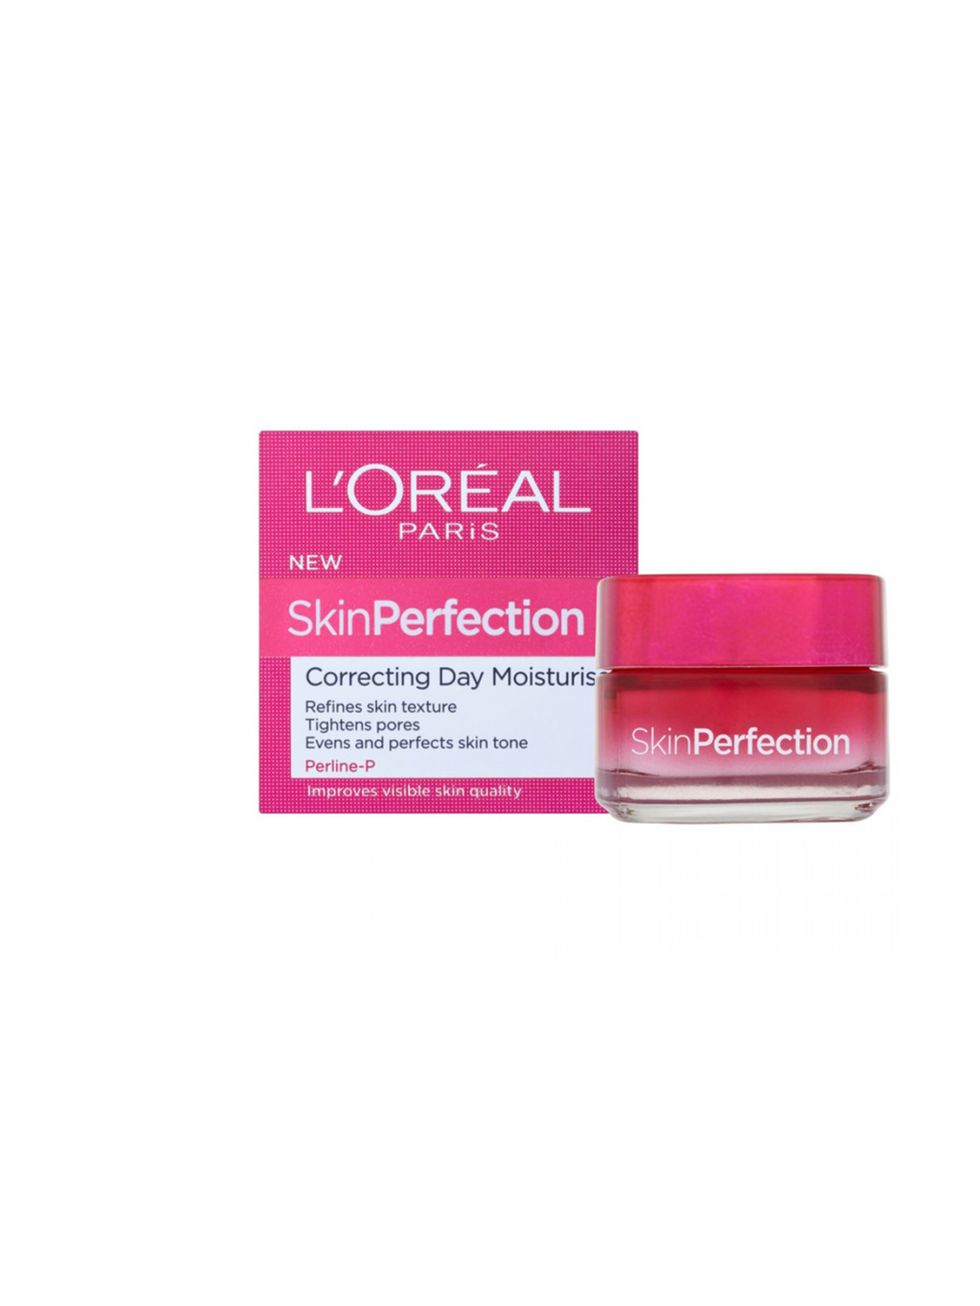 <p><a href="http://www.loreal-paris.co.uk/skin-perfection/">L'Oreal Skin Perfection Range</a></p>